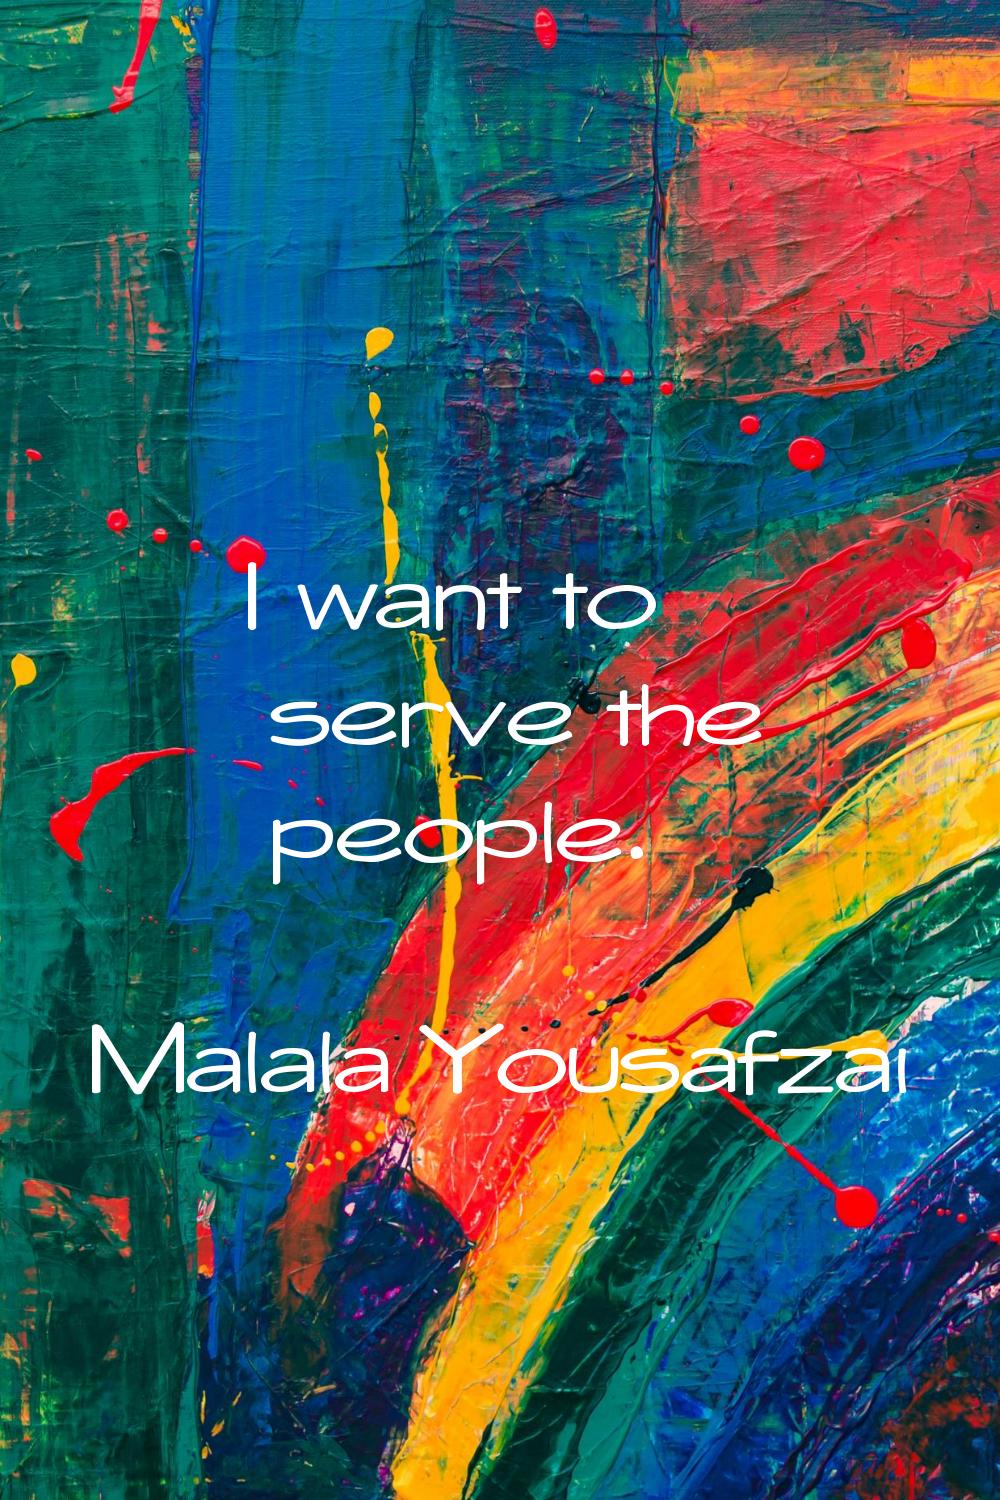 I want to serve the people.